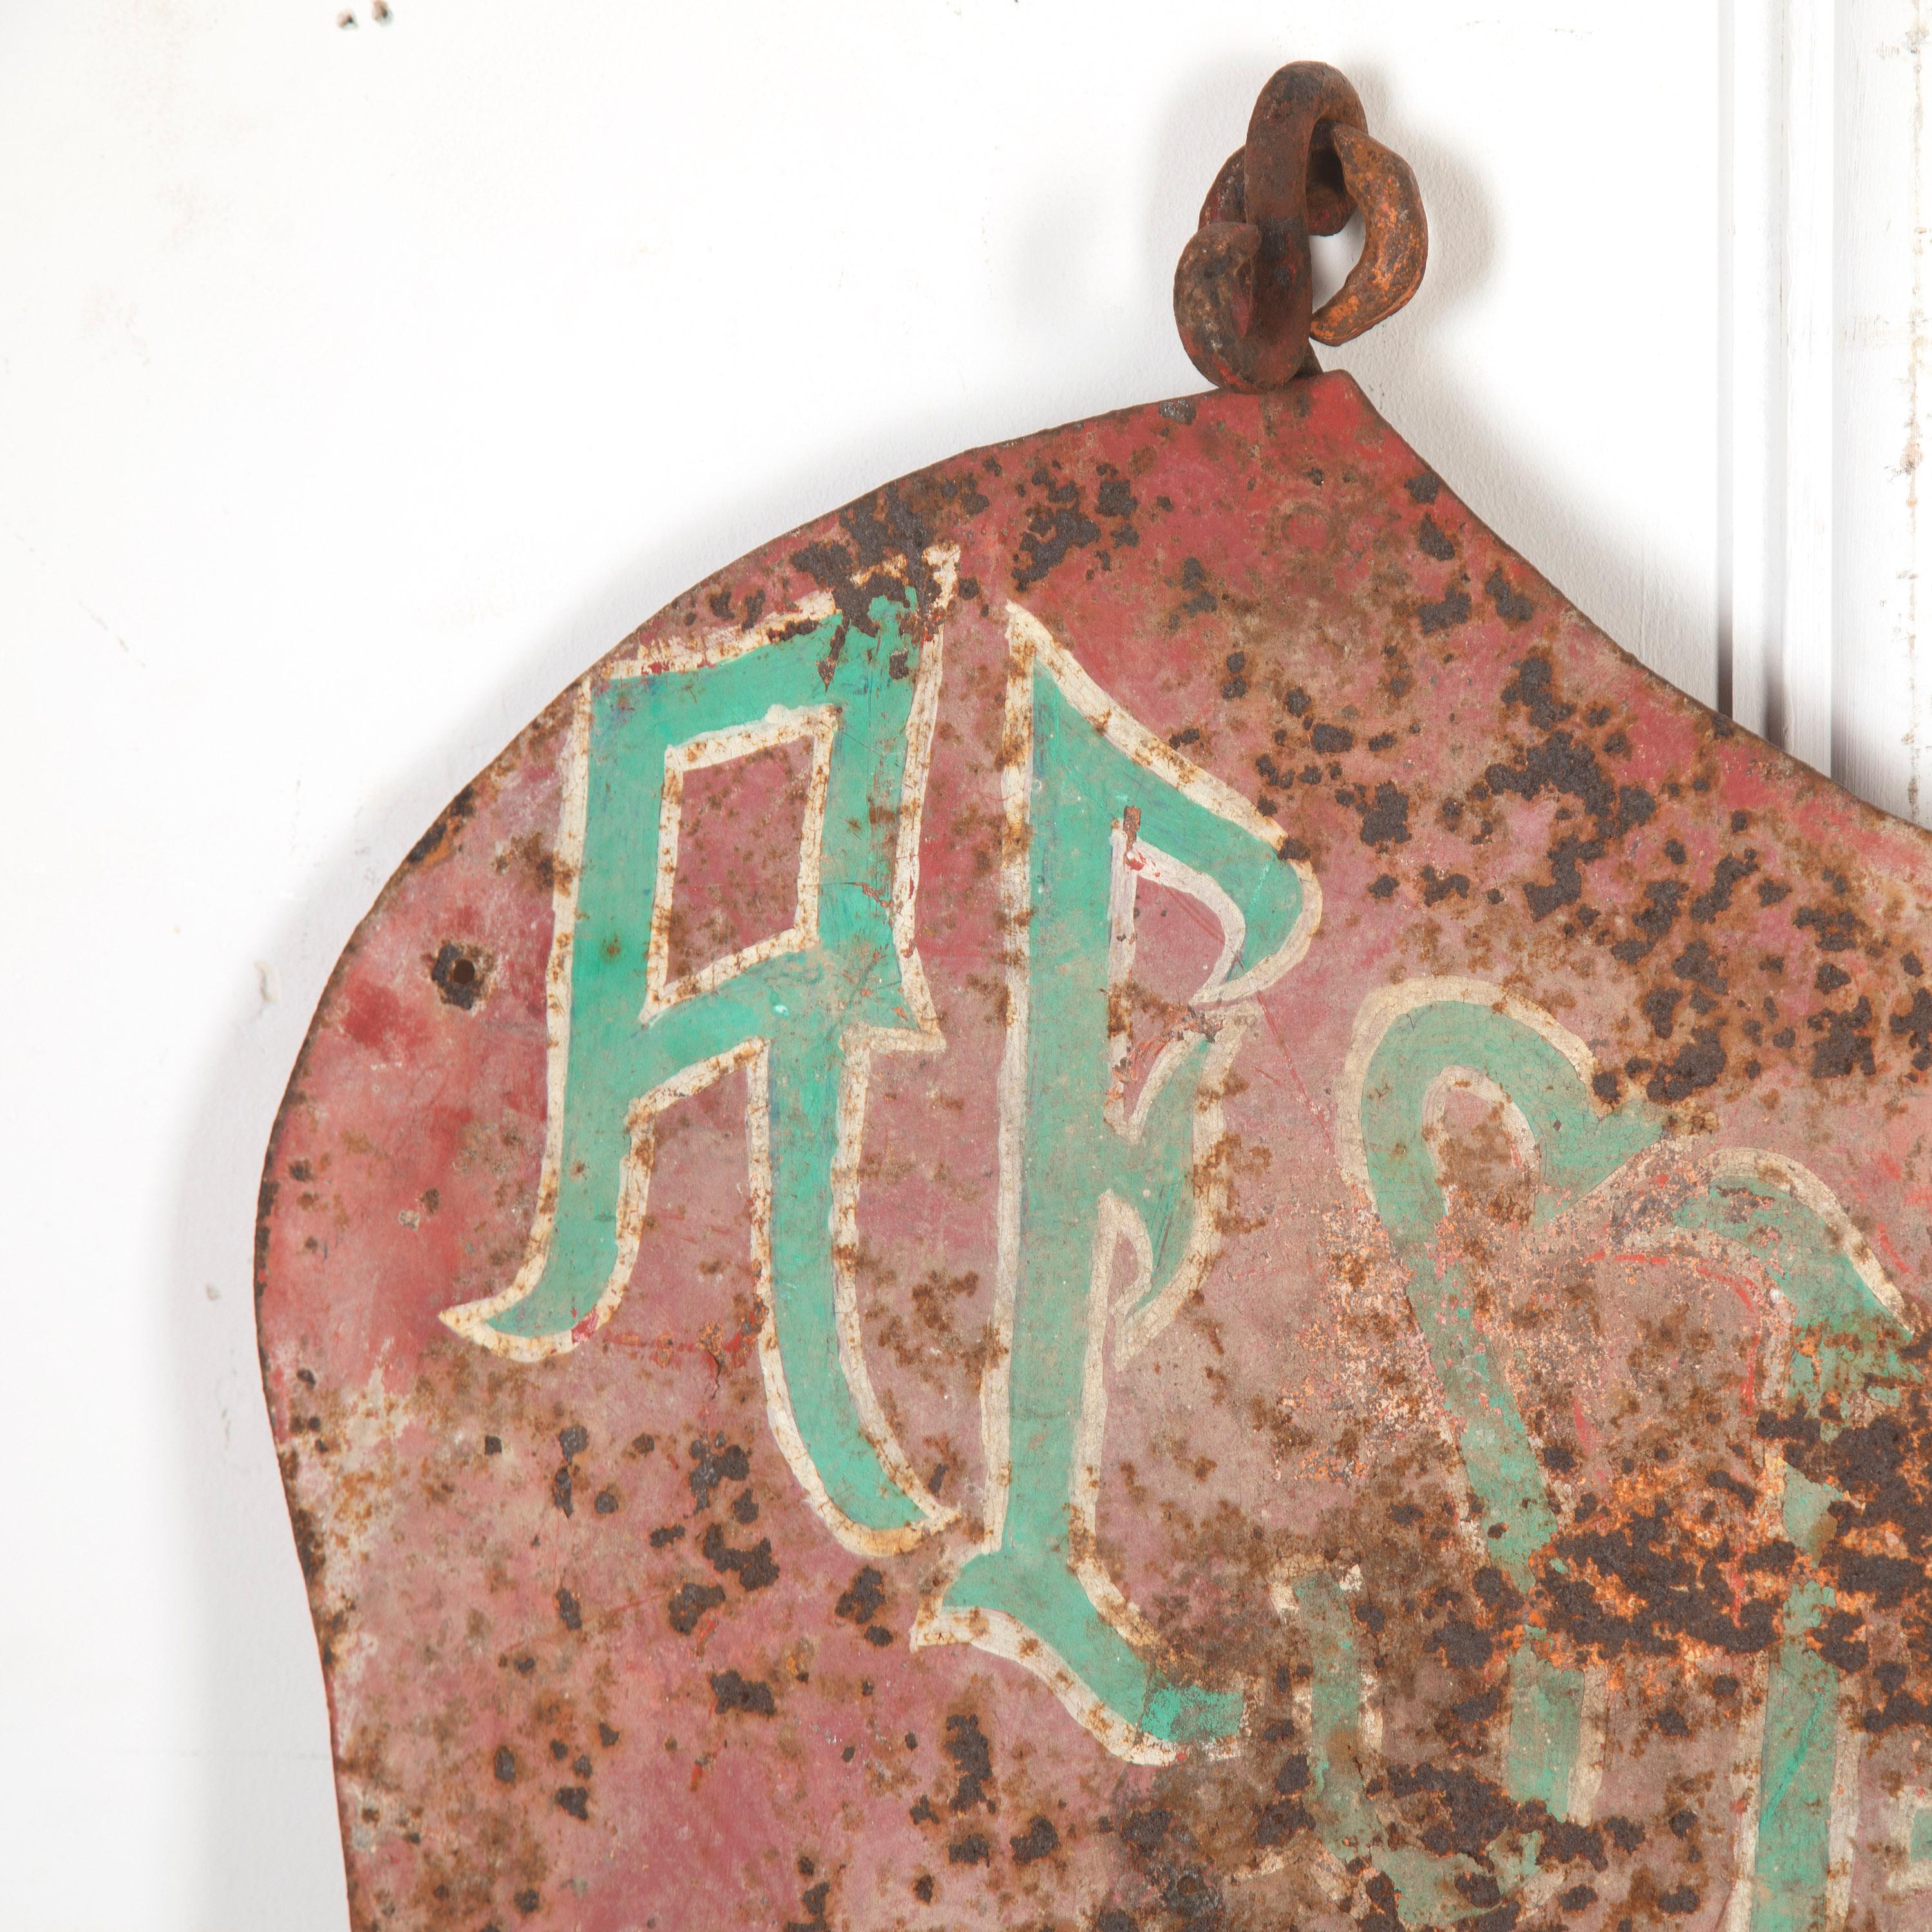 Original French 20th century hand-painted restaurant trade sign. 

This double-sided sign has a great unusual shape with wonderful remains of red and green paint.

This sign has a brilliant weathered and worn patina, particularly on one side.